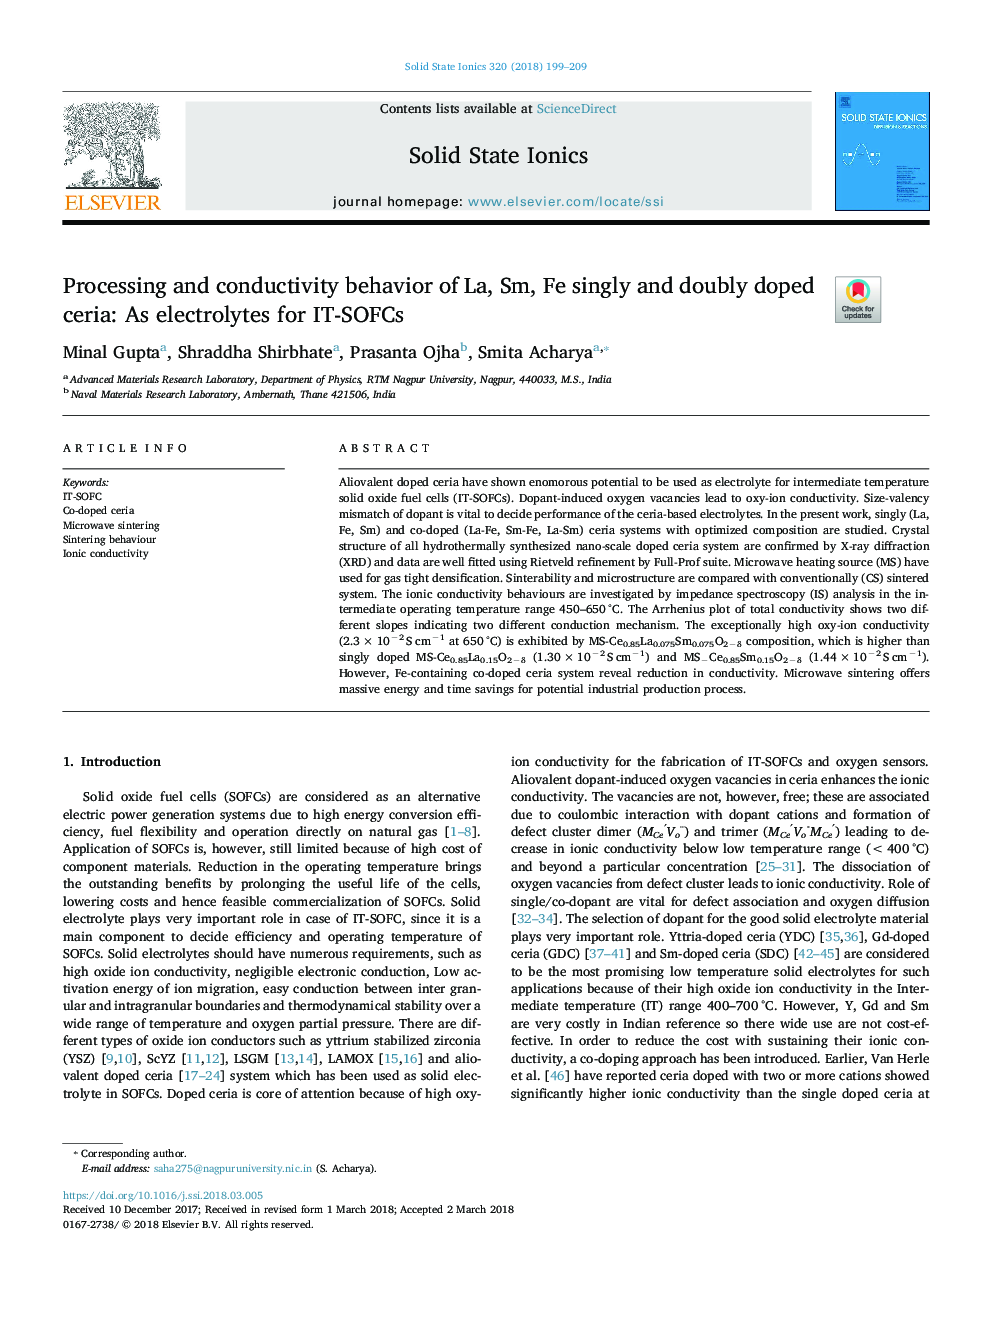 Processing and conductivity behavior of La, Sm, Fe singly and doubly doped ceria: As electrolytes for IT-SOFCs